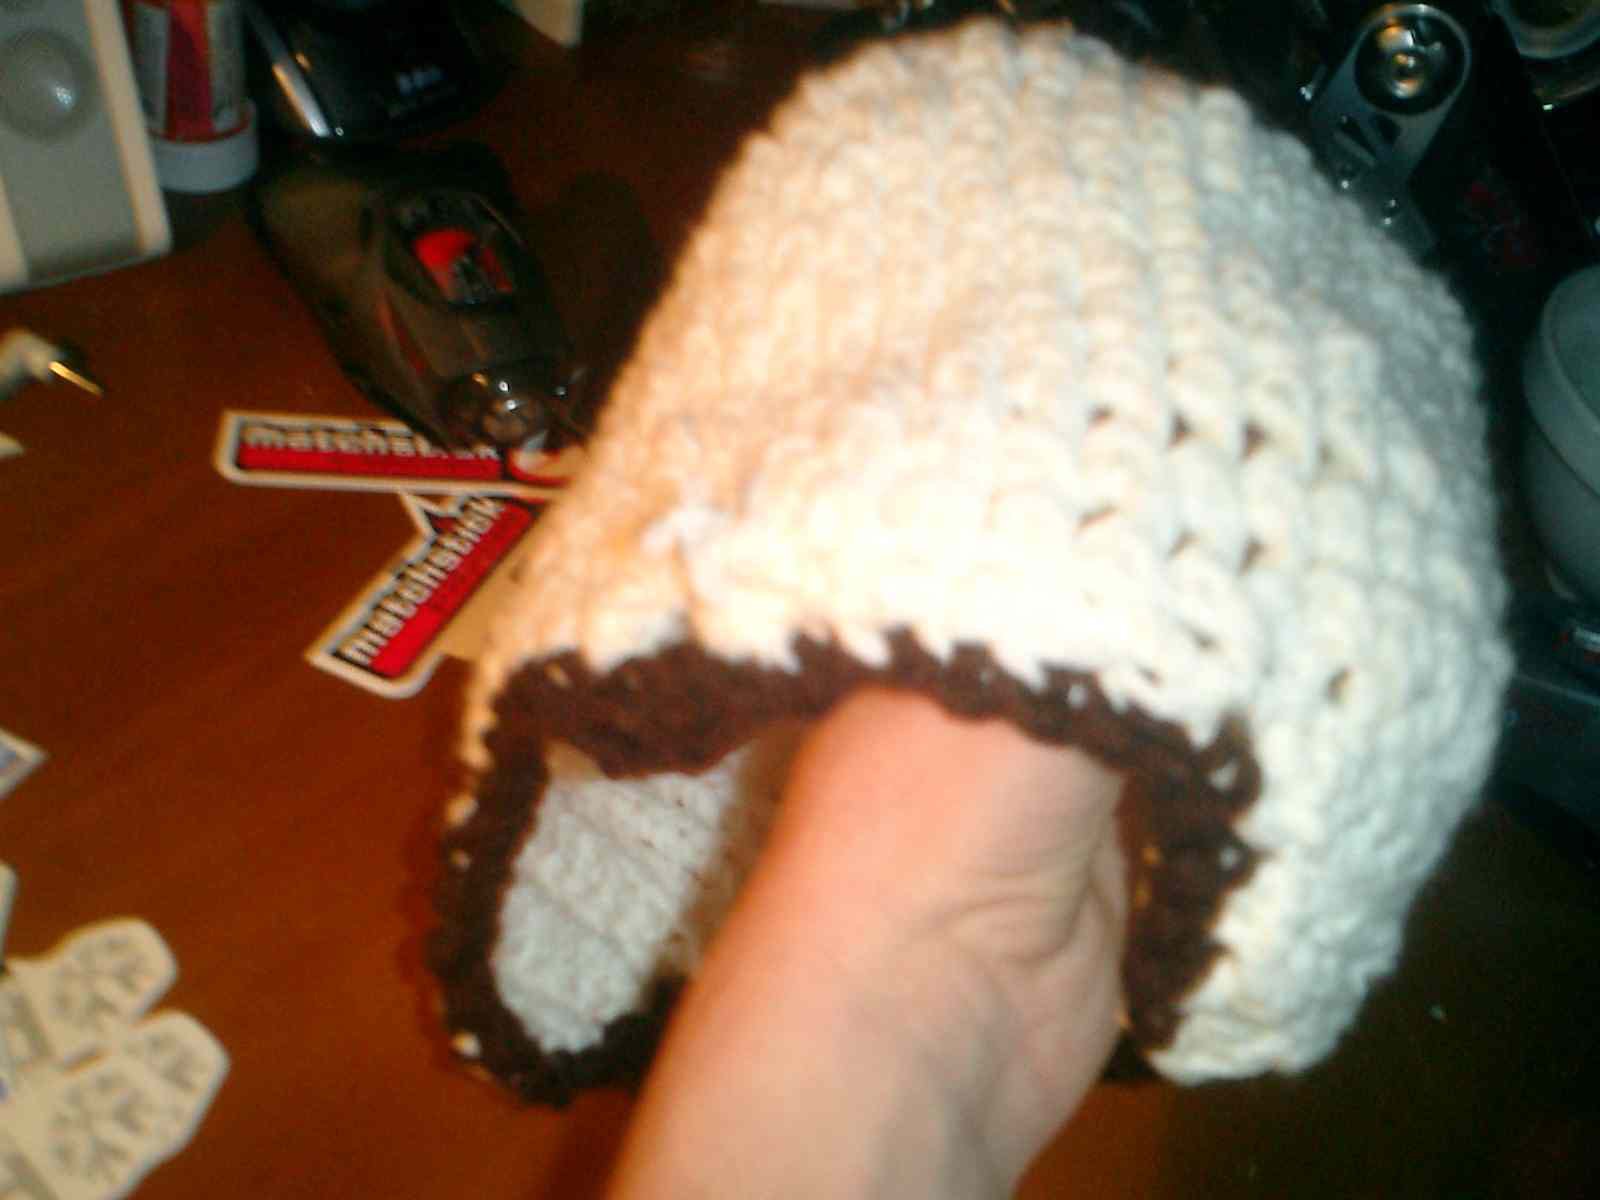 my first hat!